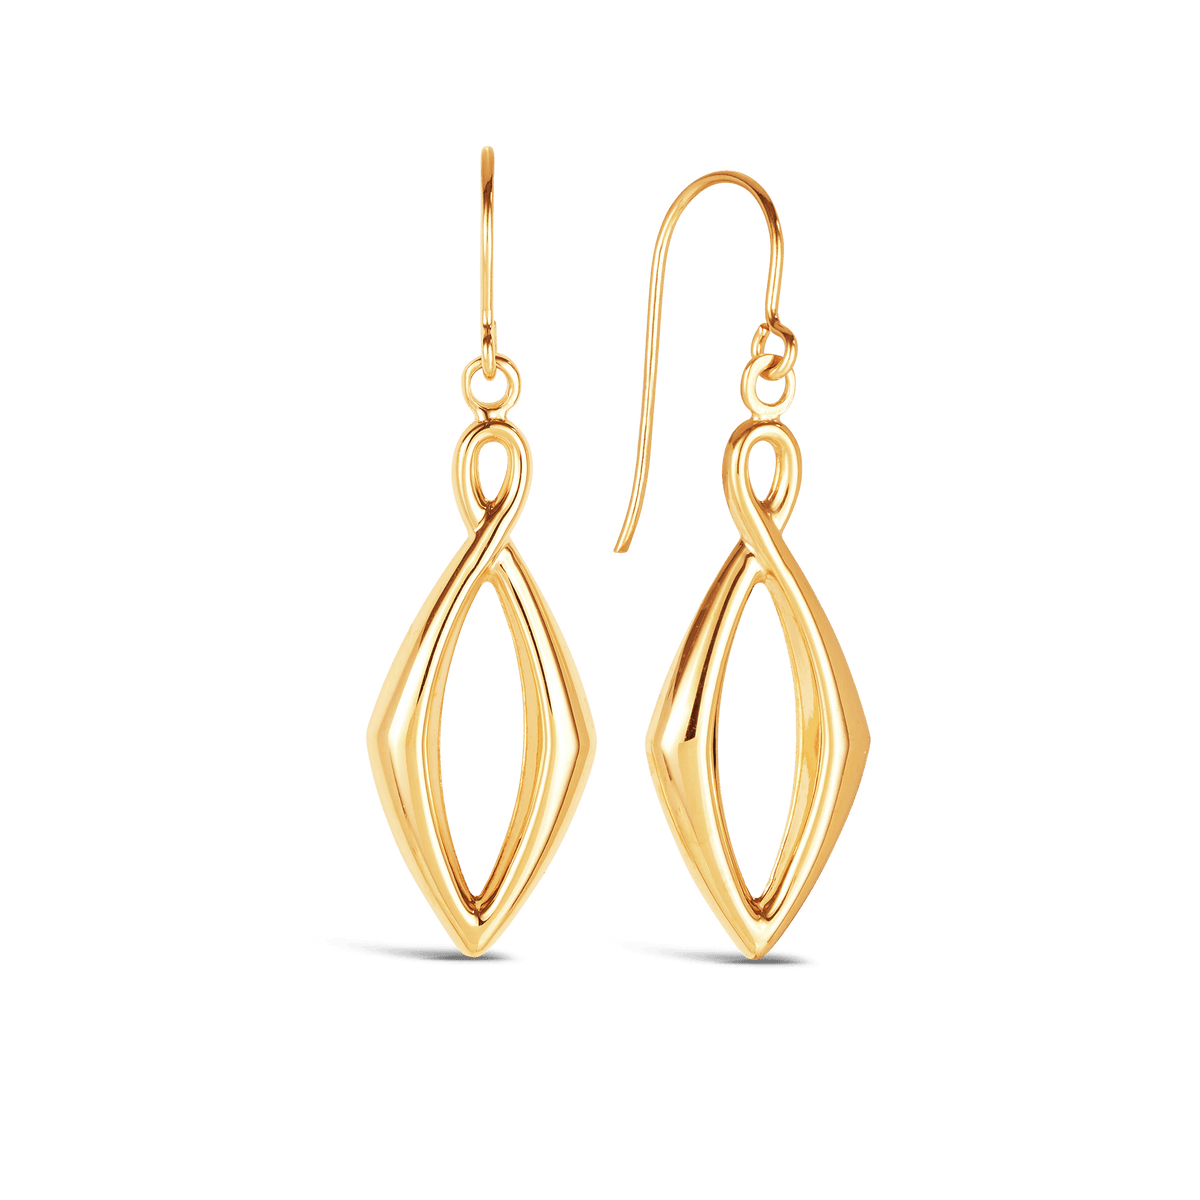 Drop Twist Hollow Earrings in 9ct Yellow Gold - Wallace Bishop